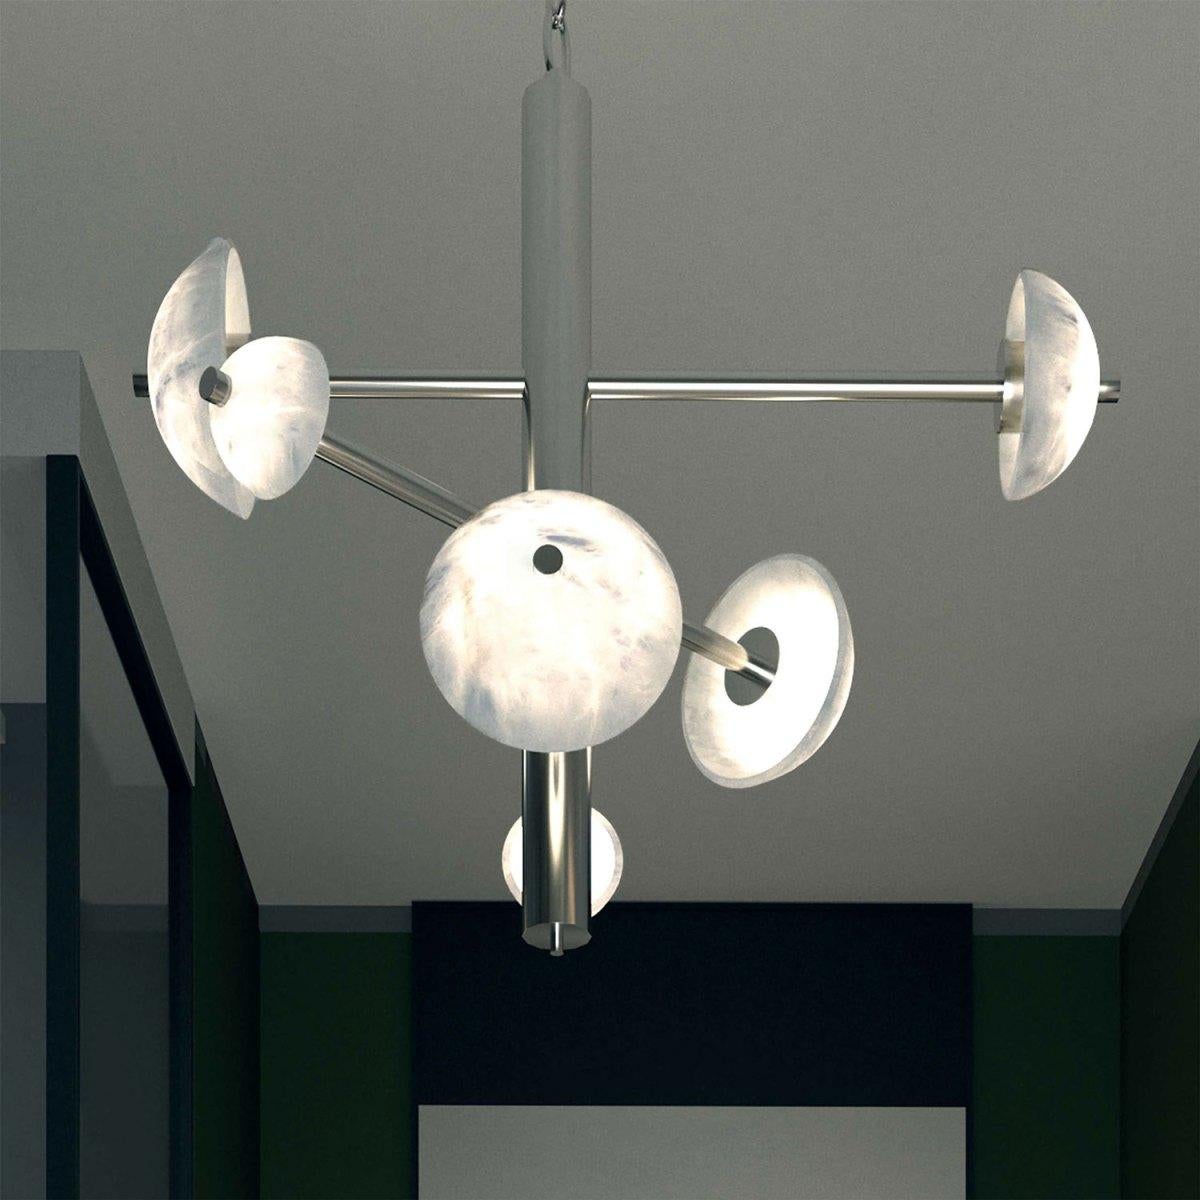 Apollo Bronze Pendant Lamp by Alabastro Italiano
Dimensions: D 70,5 x W 54 x H 64 cm.
Materials: White alabaster and bronze.

Available in different finishes: Shiny Silver, Bronze, Brushed Brass, Ruggine of Florence, Brushed Burnished, Shiny Gold,